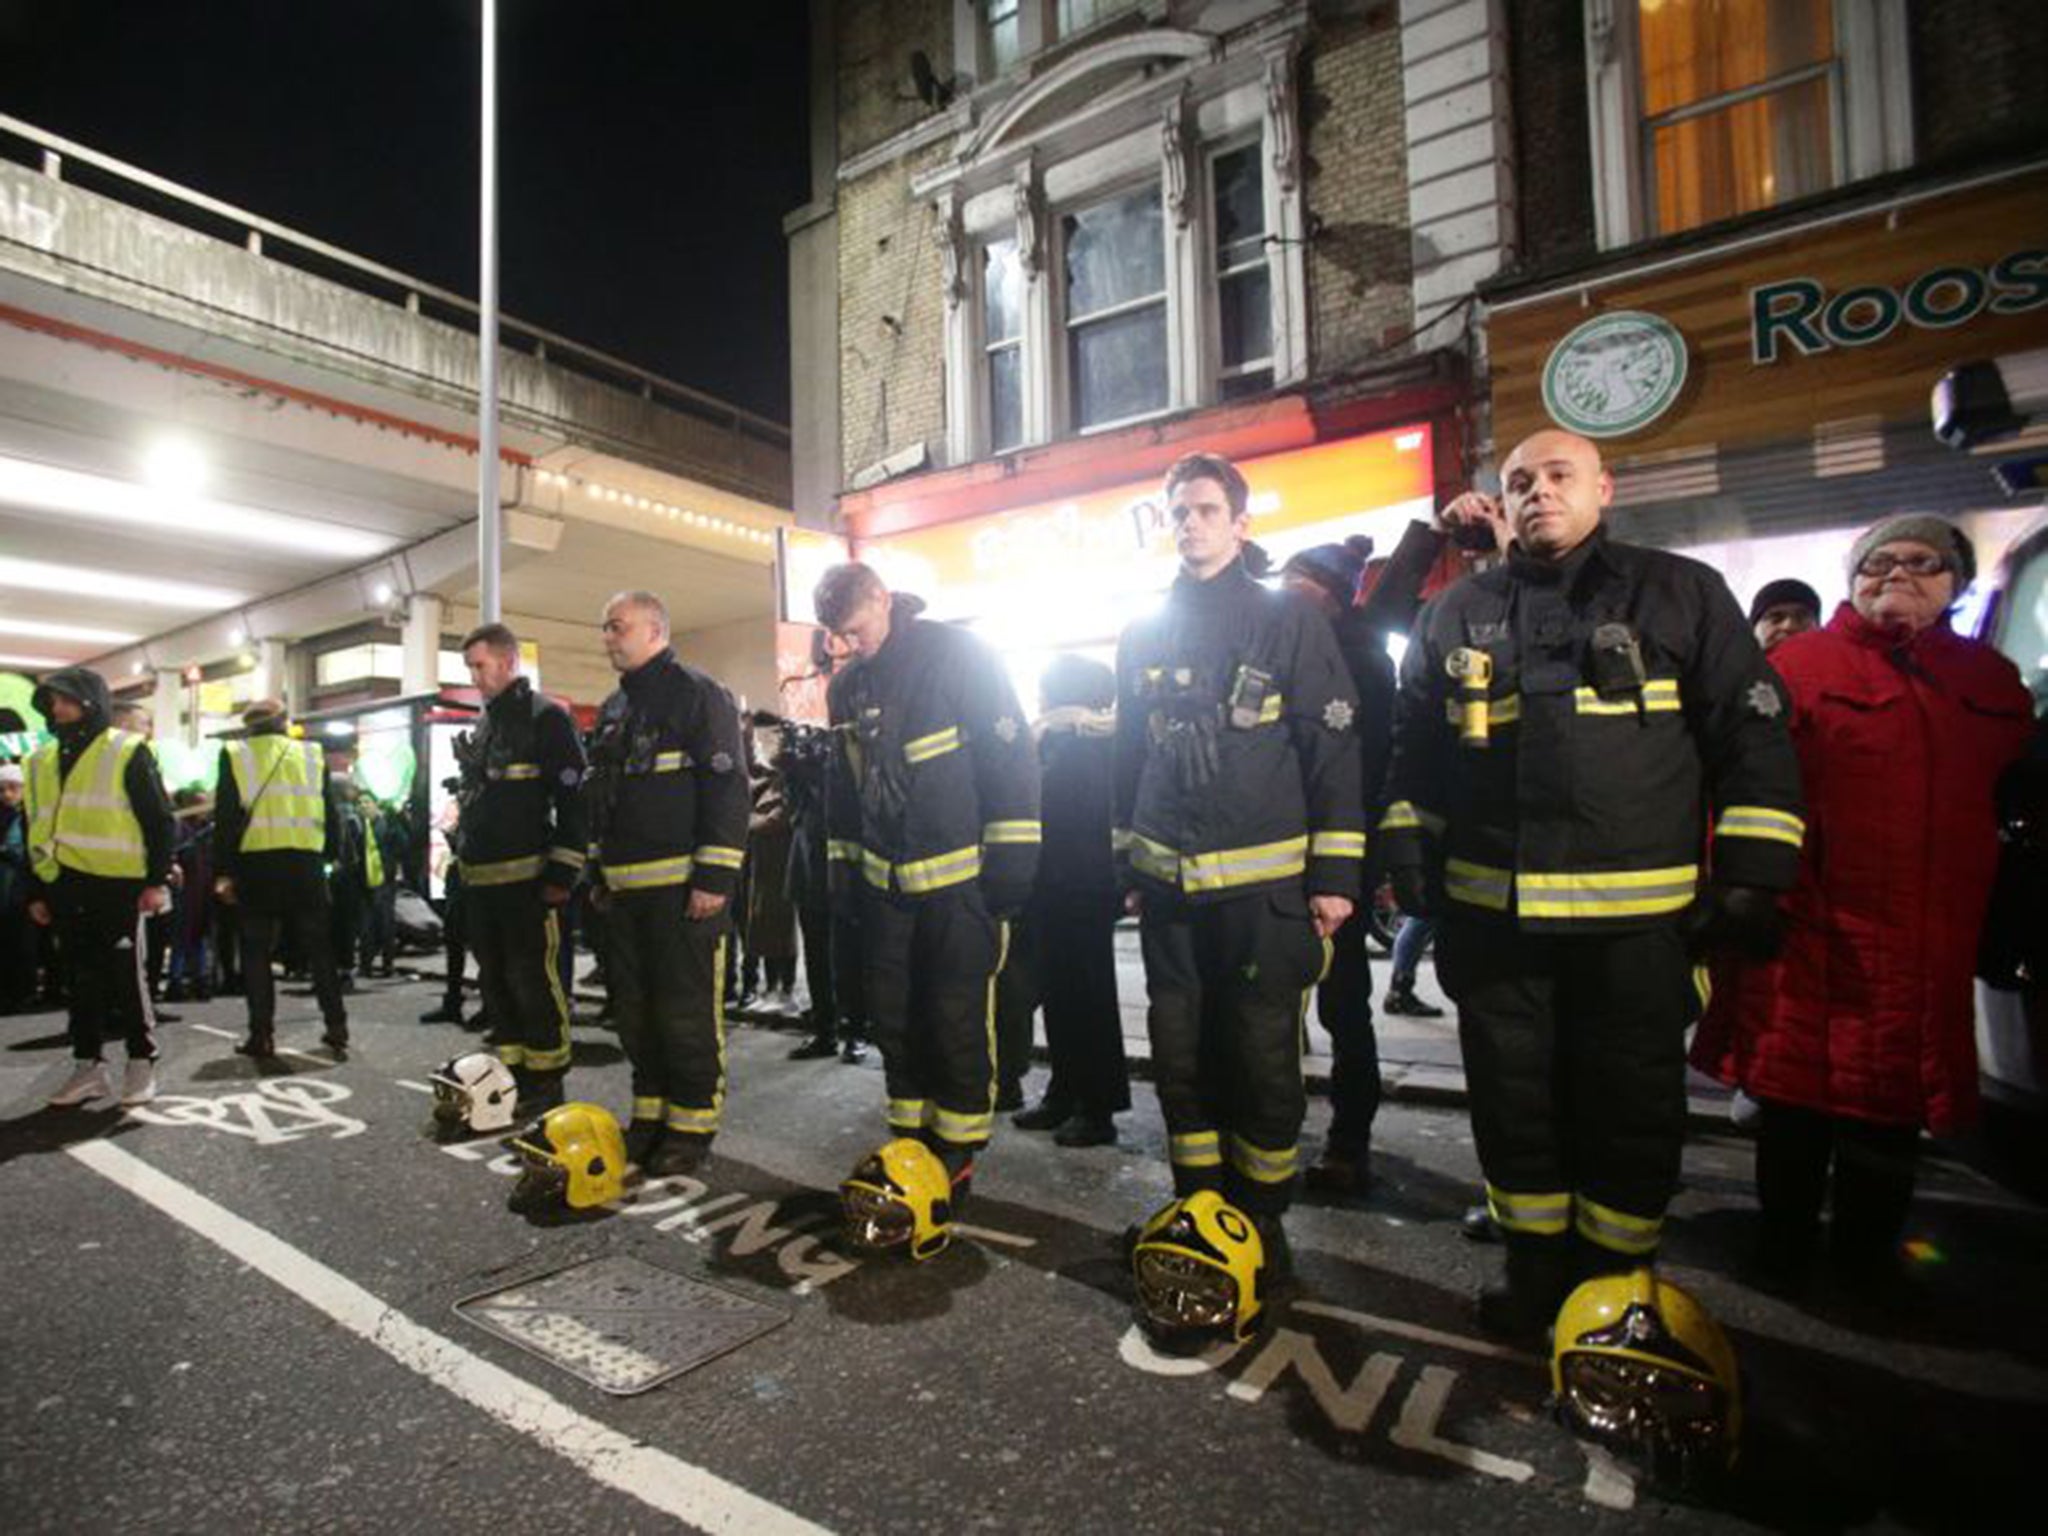 Firefighters pay their respects in a vigil for the Grenfell Tower victims